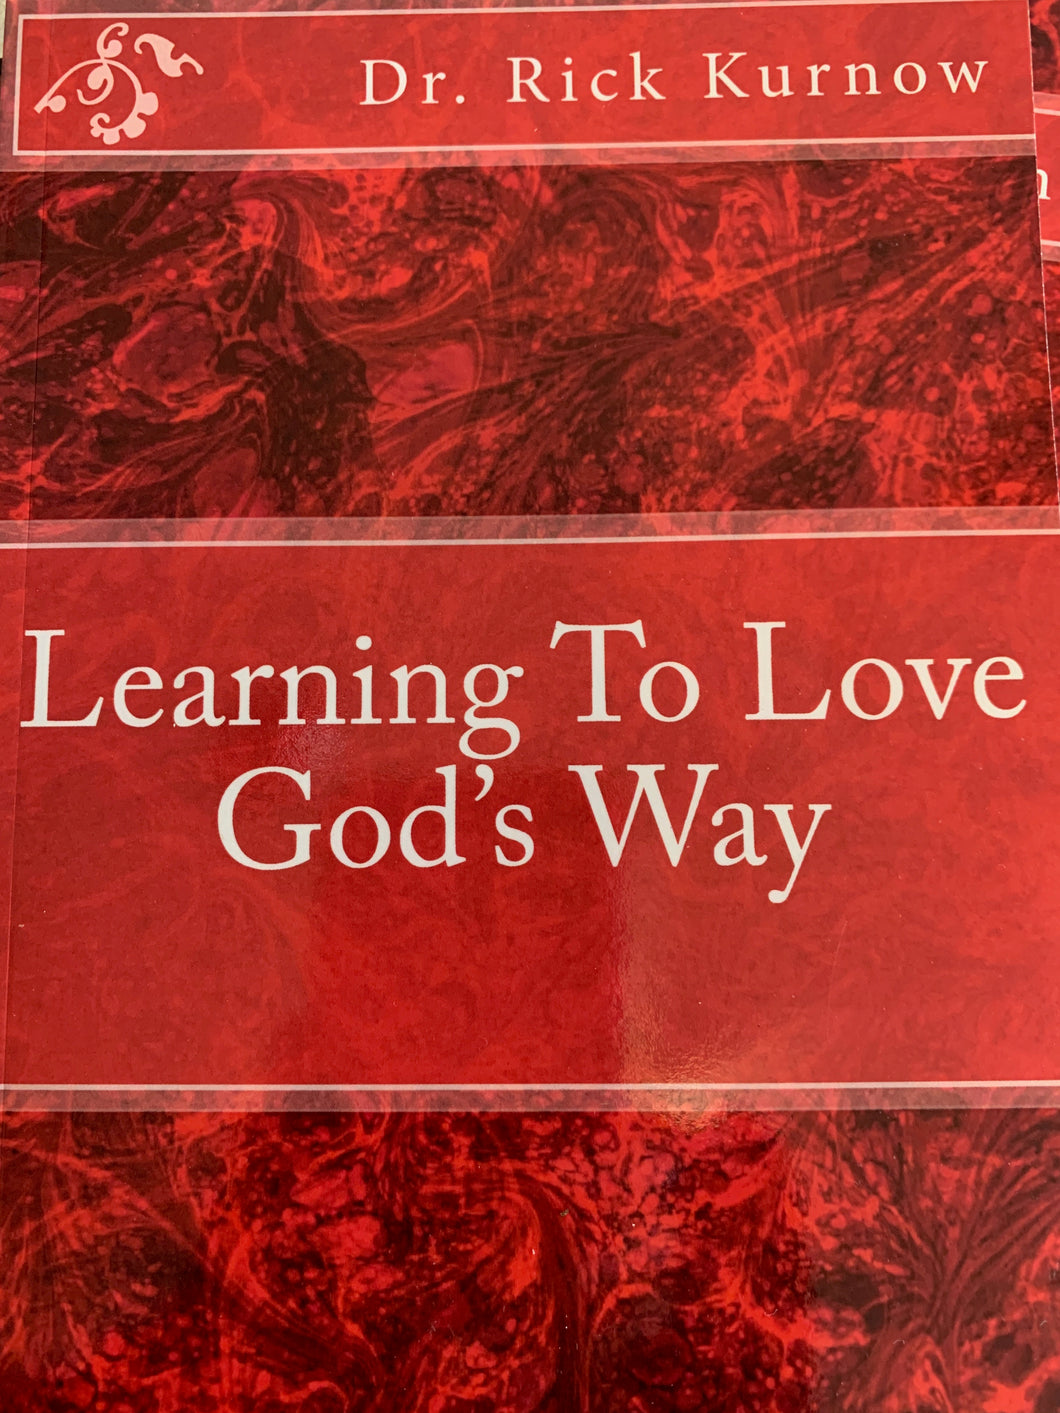 Book:   Learning To Love God's Way